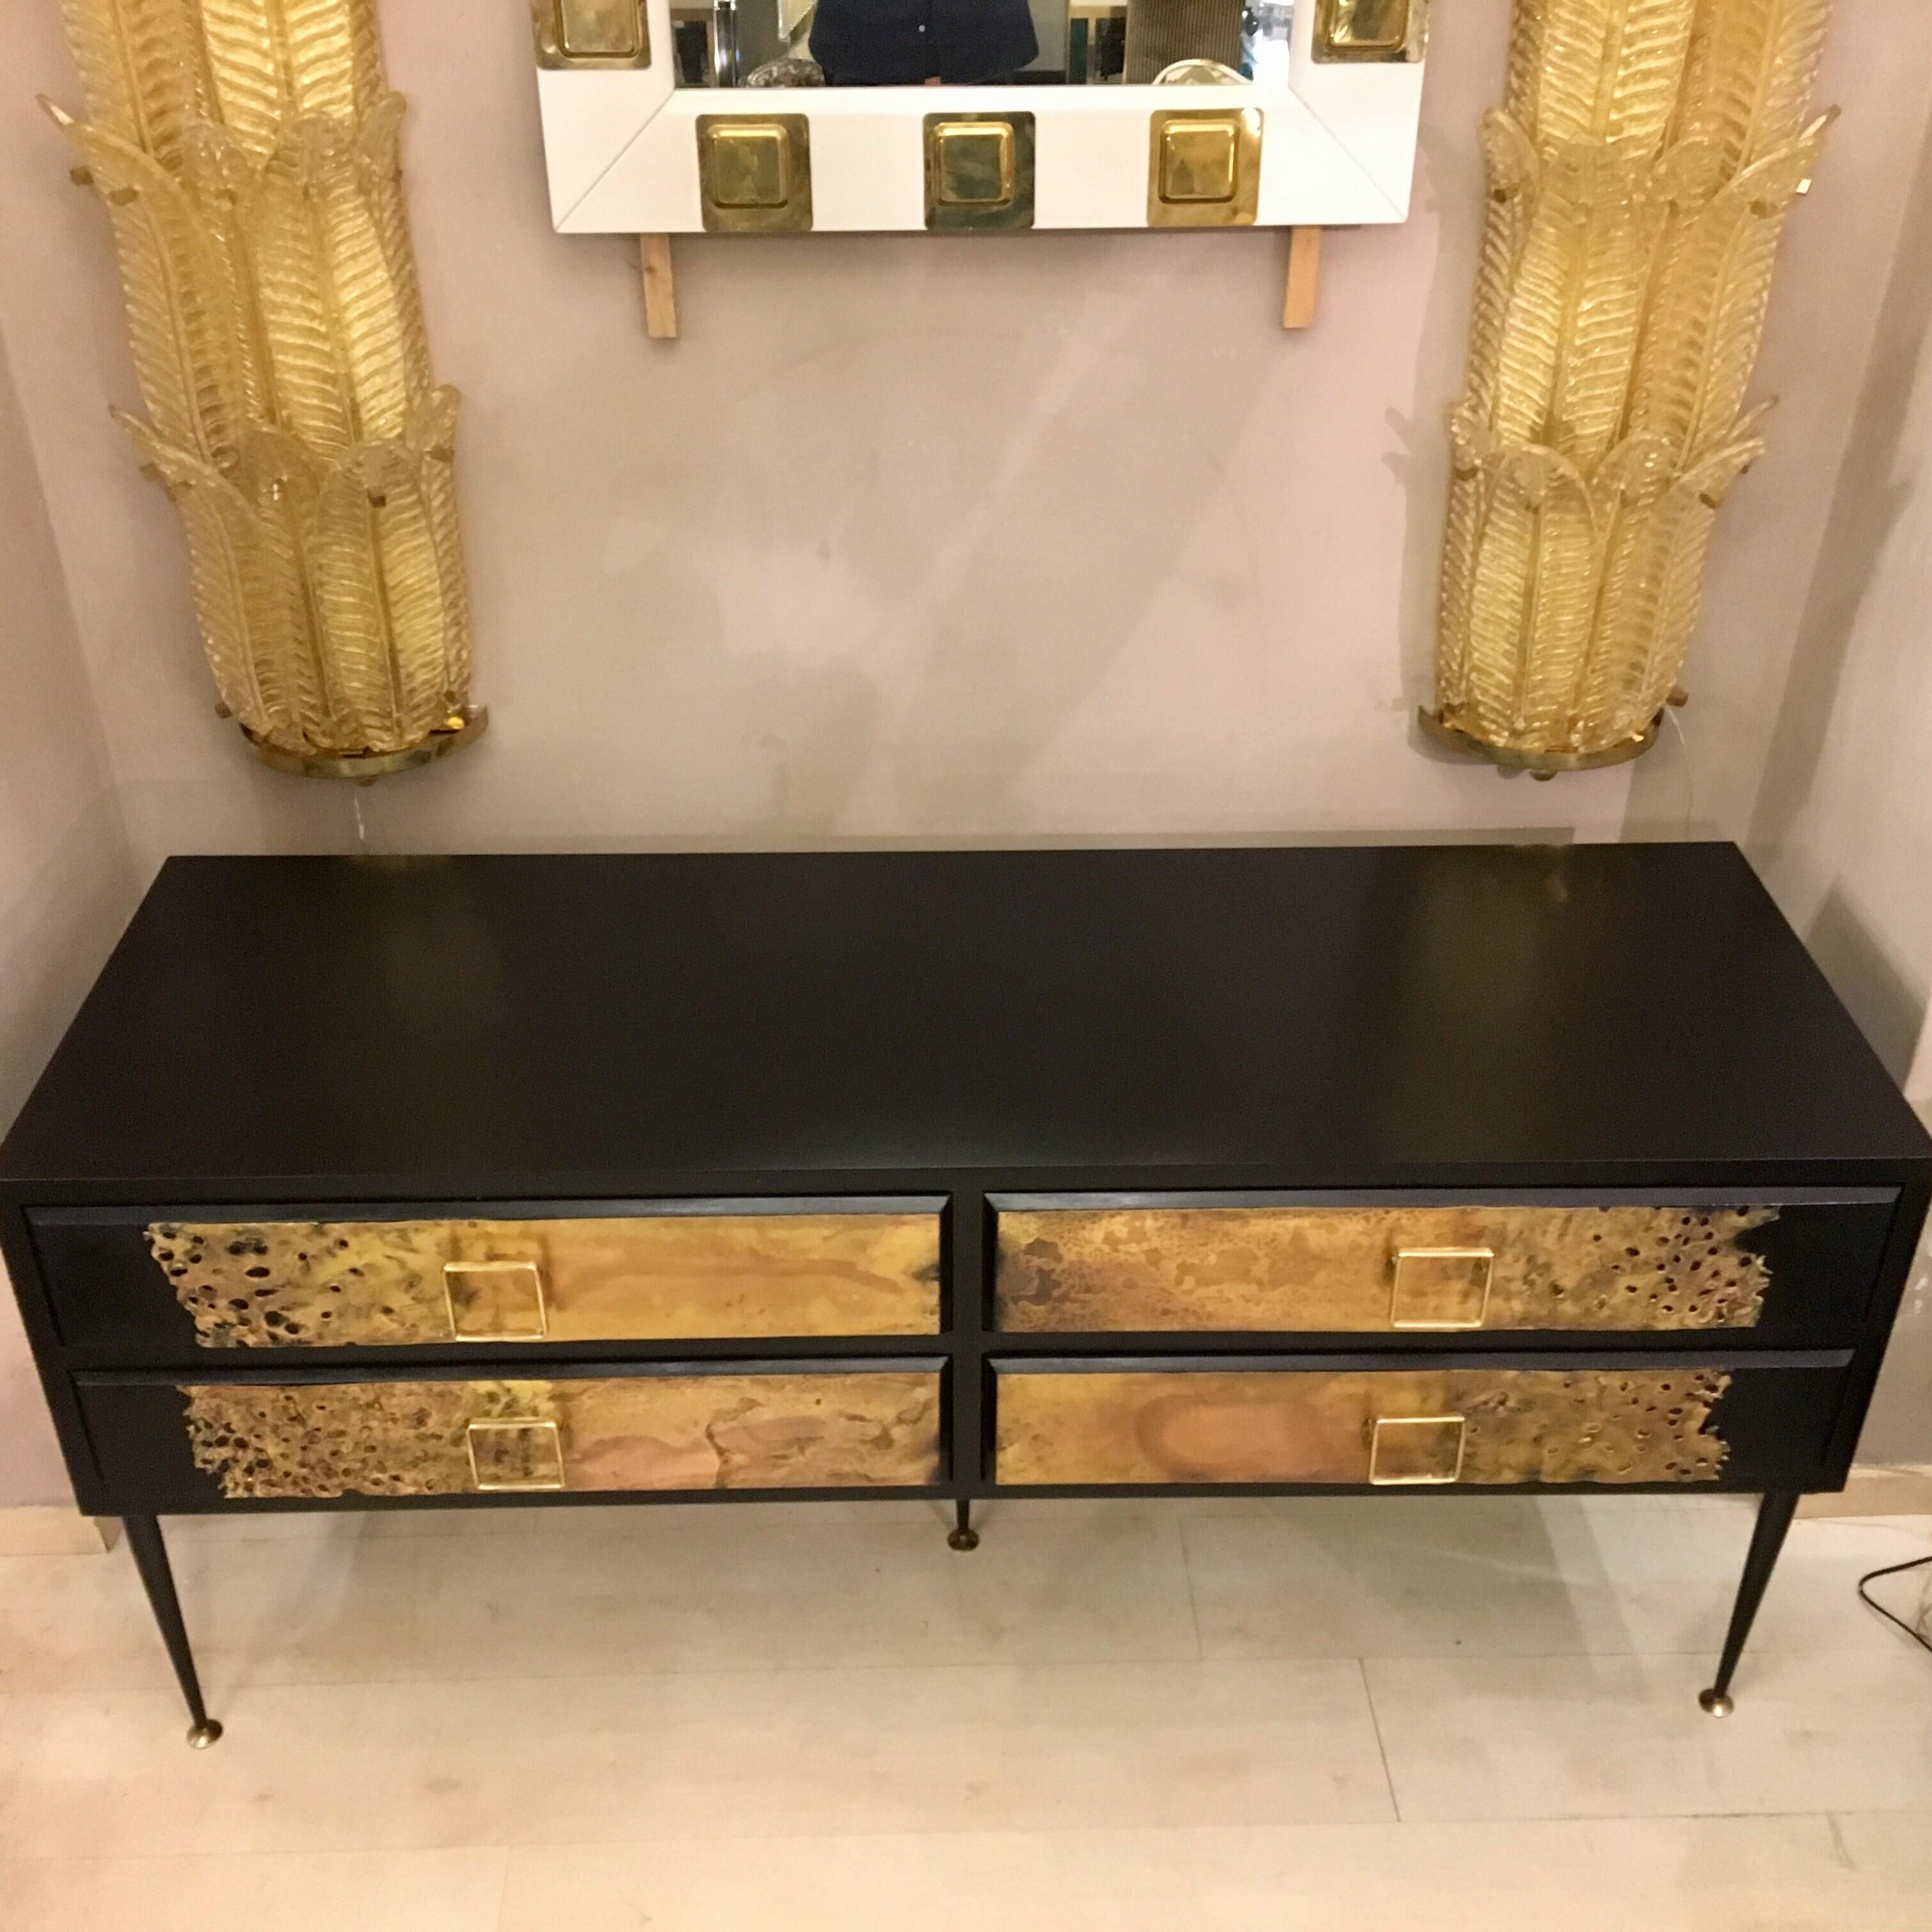 Chest of drawers in black lacquered wood, four drawers frontal application of sculpture effect brass plates, brass square handles.